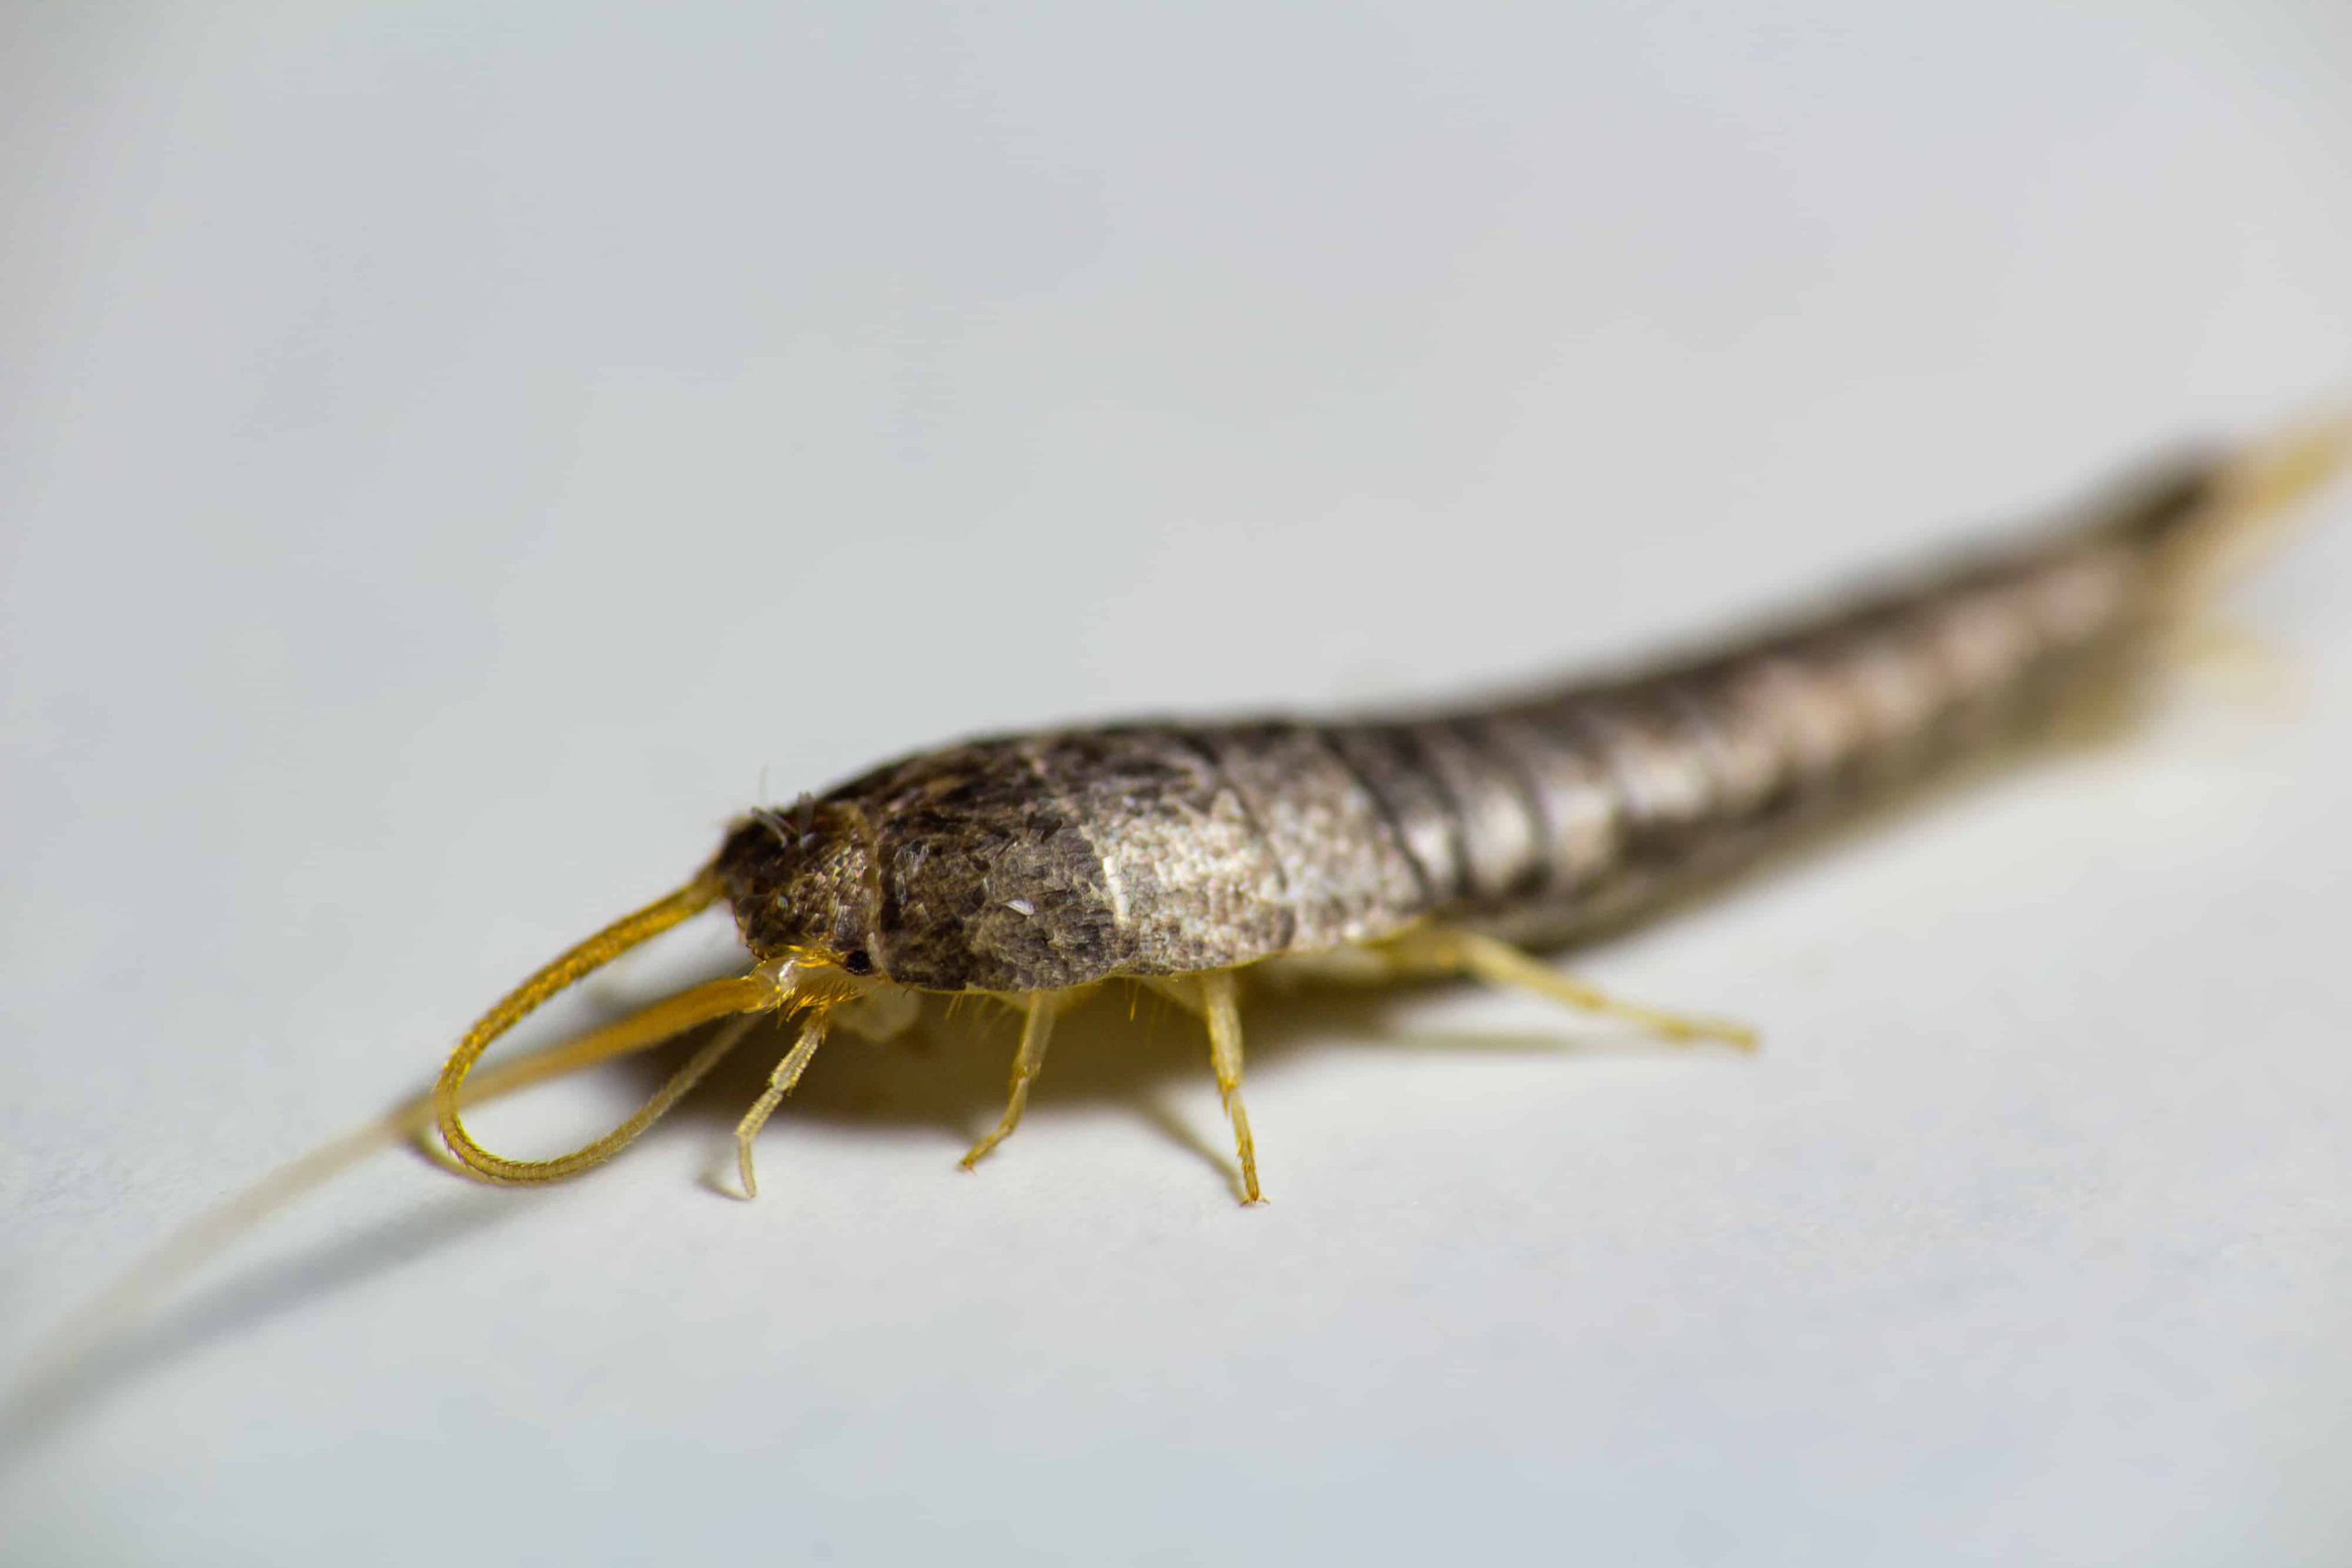 bid farewell to silverfish forever with these effective solutions scaled